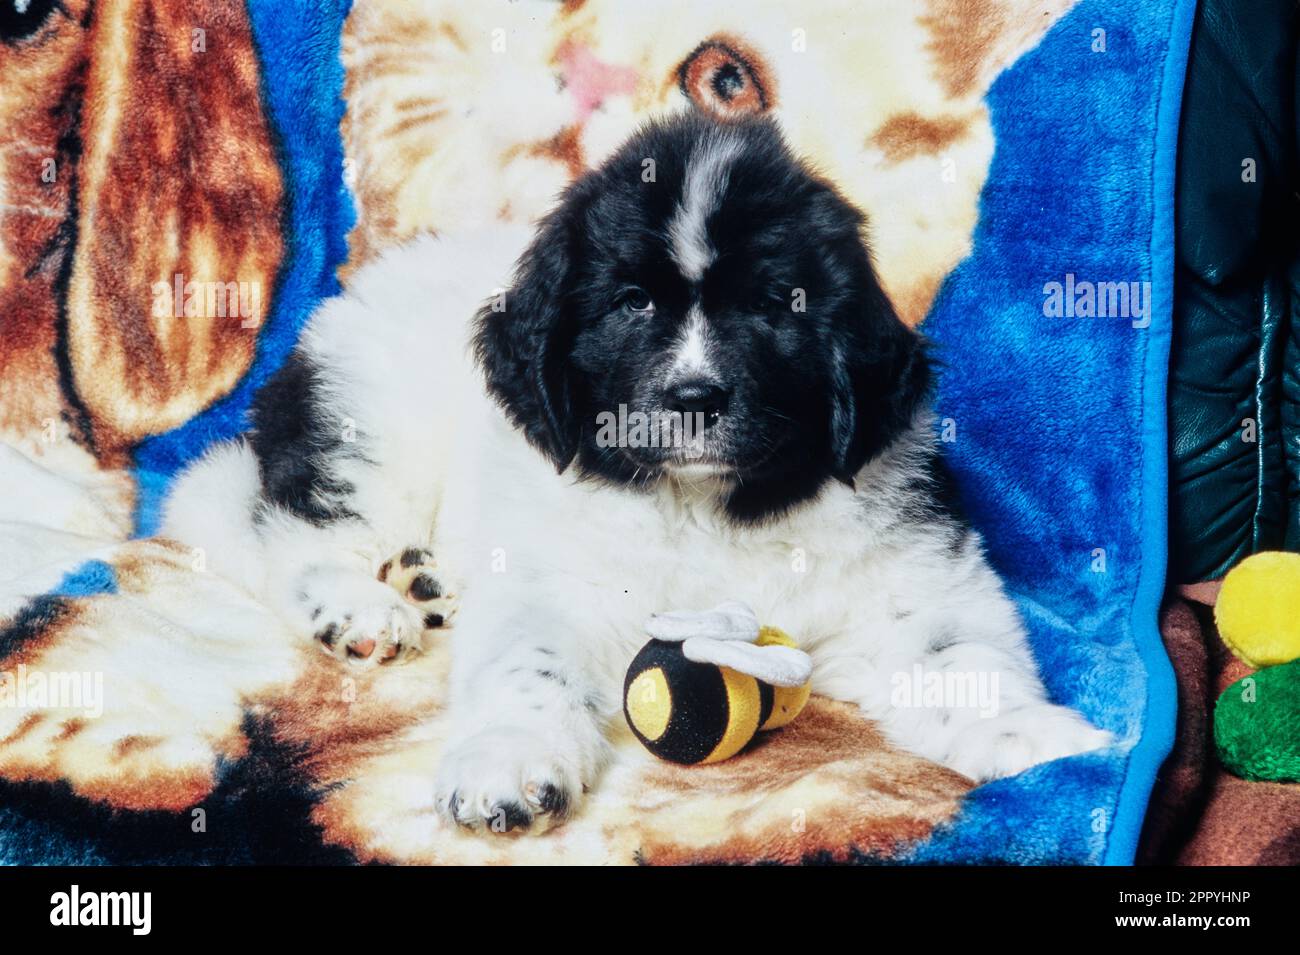 Newfoundland puppy sitting with toy on blanket with puppy and kitten image Stock Photo